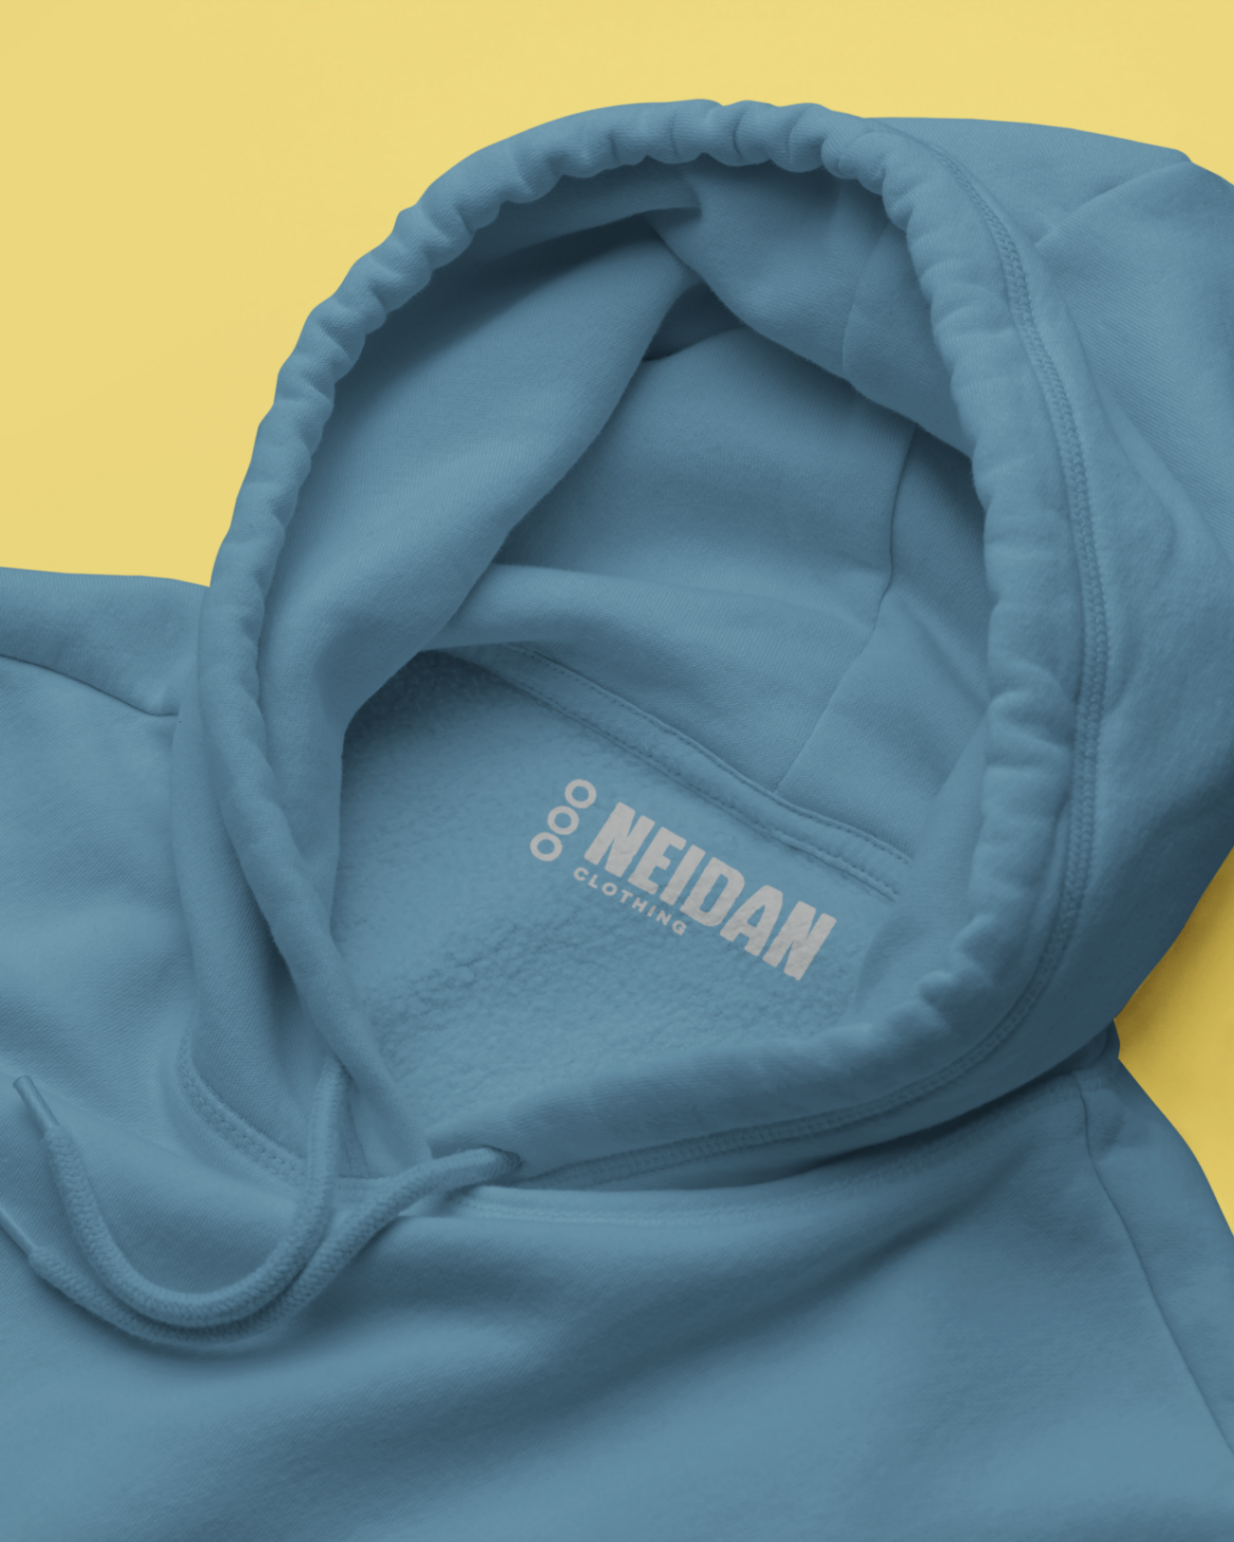 a closeup of an airforce blue hoodie neck label with neidan clothing logo